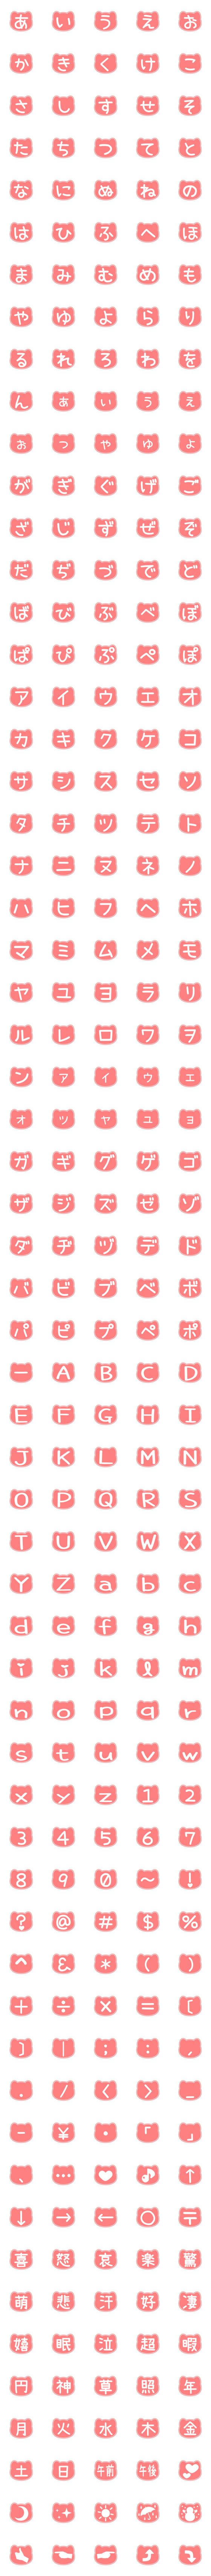 [LINE絵文字]ネコ枠絵文字(ピンク)の画像一覧